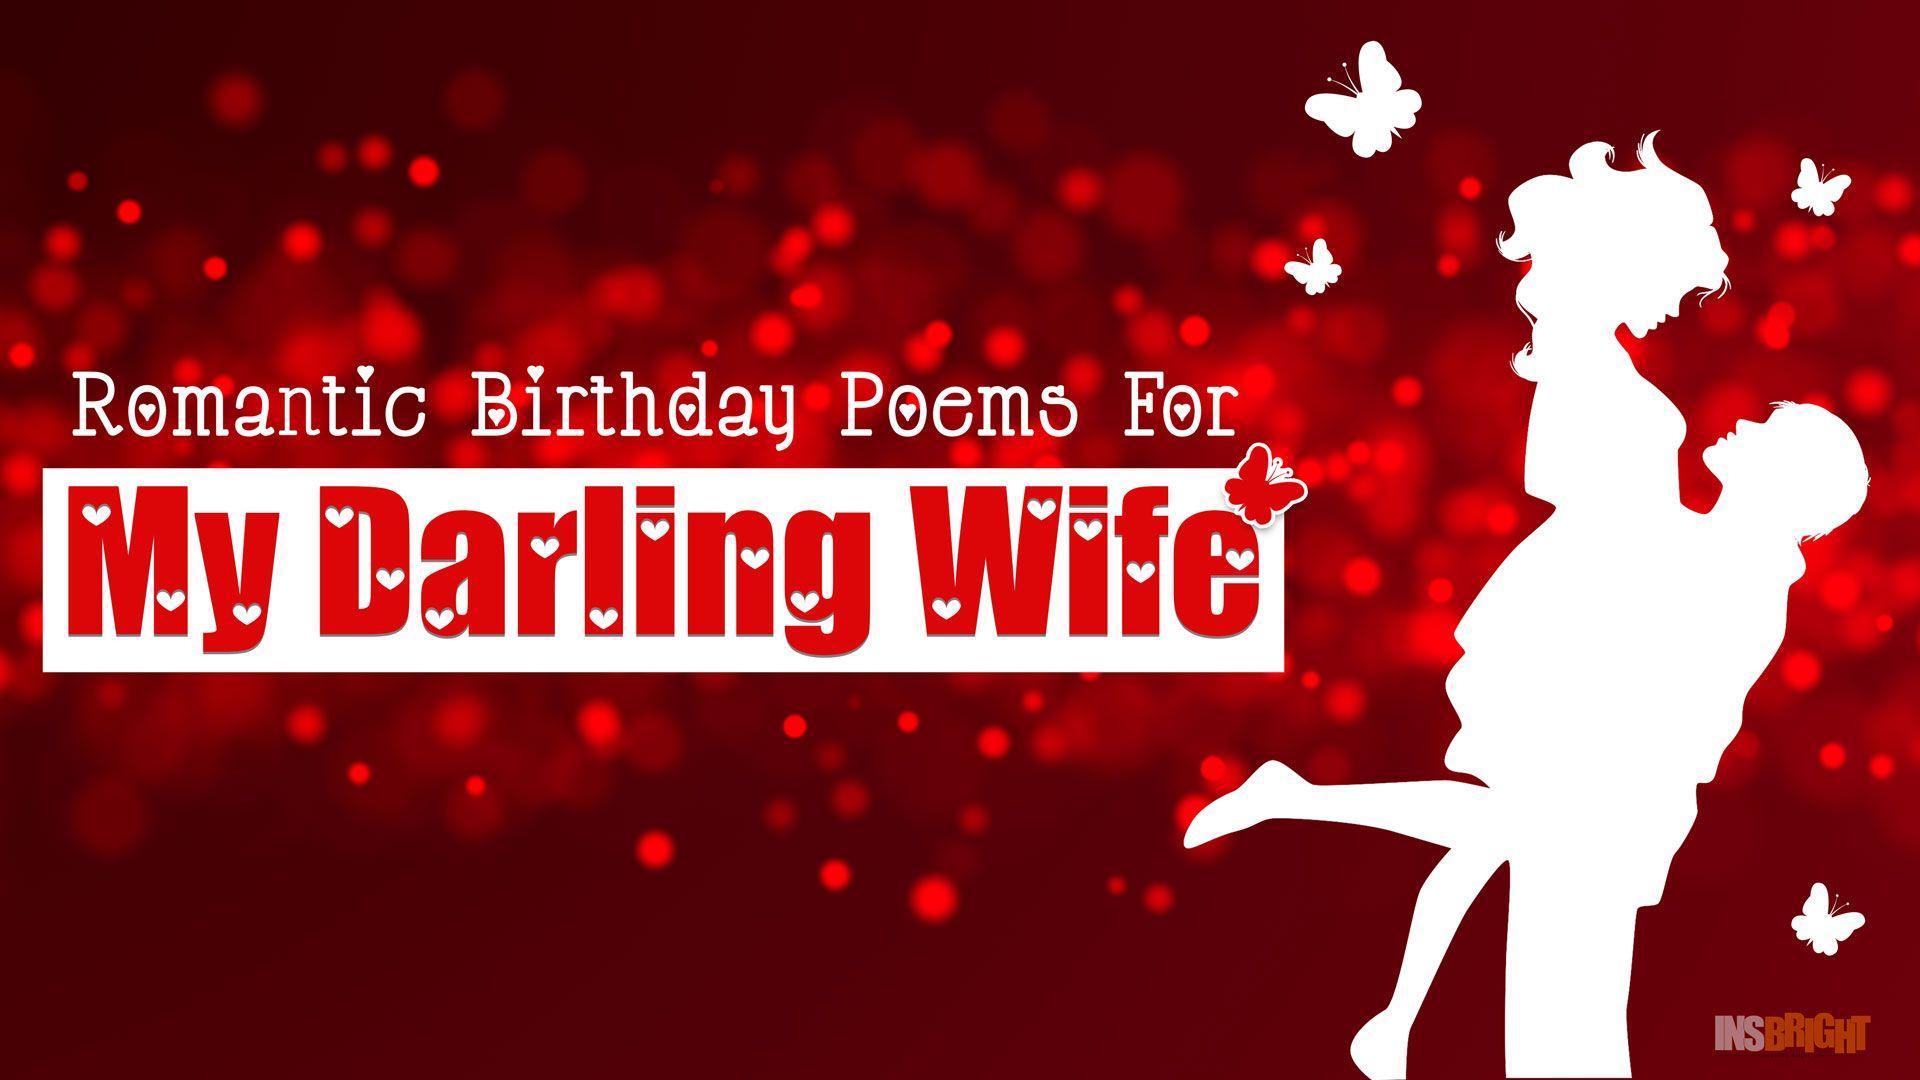 Romantic Happy Birthday Poems For Wife With Love From Husband. Short Birthday Poems For Her